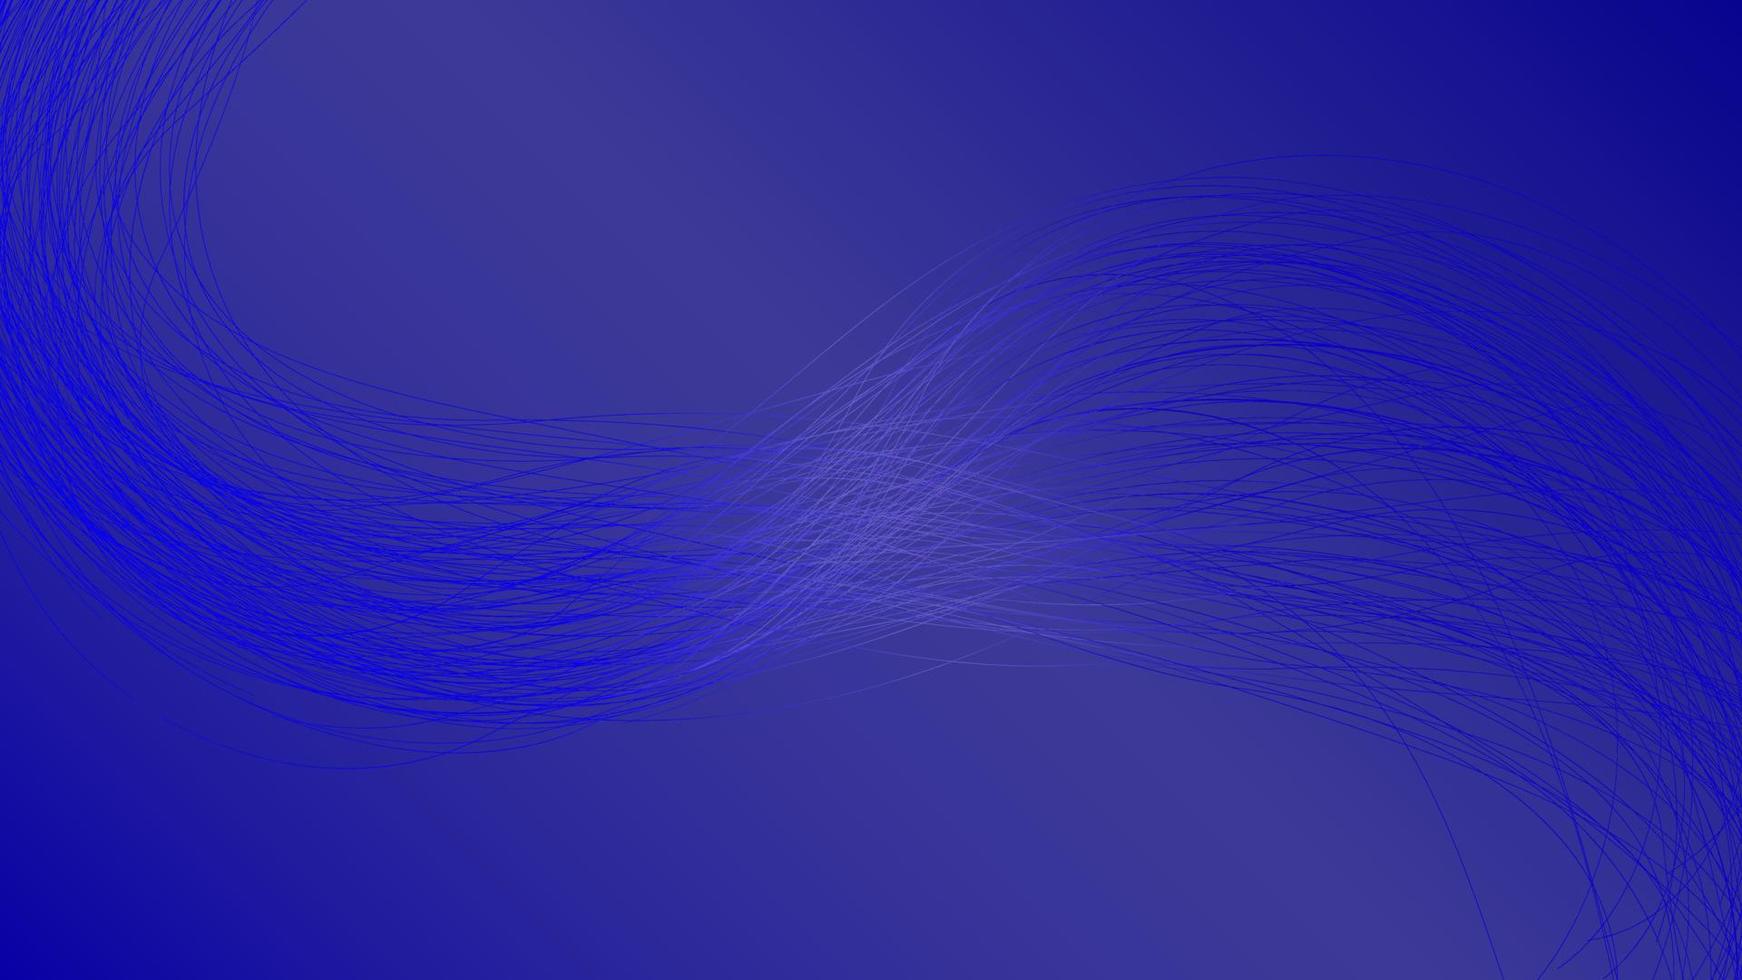 Vector Illustration of the blue of lines abstract background. EPS10.